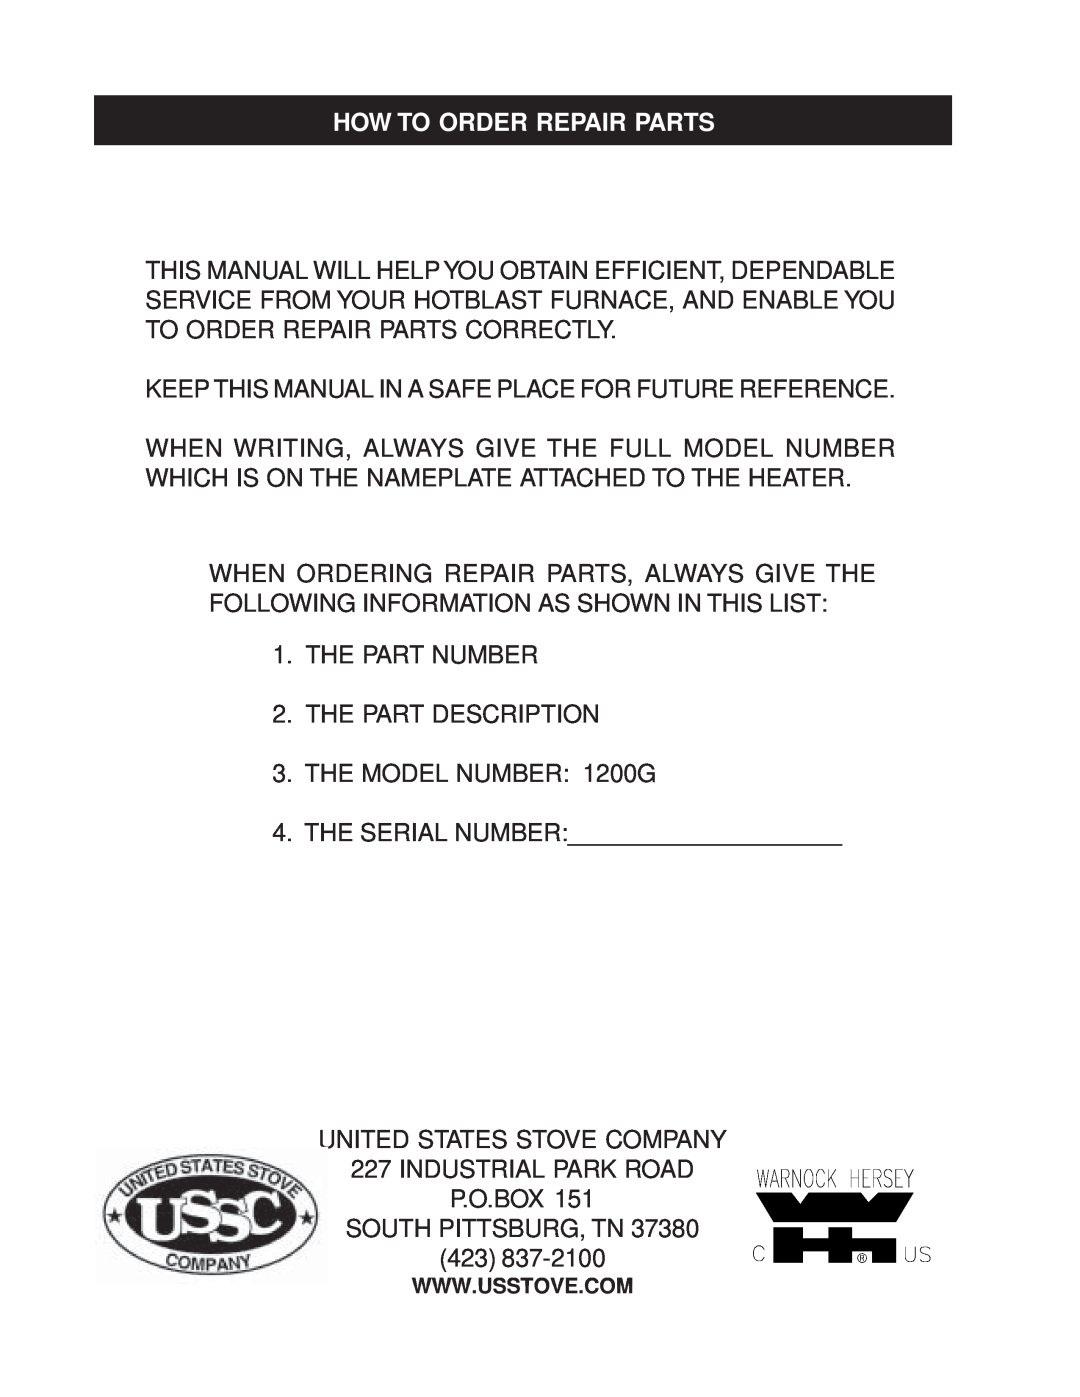 United States Stove 1200G owner manual How To Order Repair Parts 